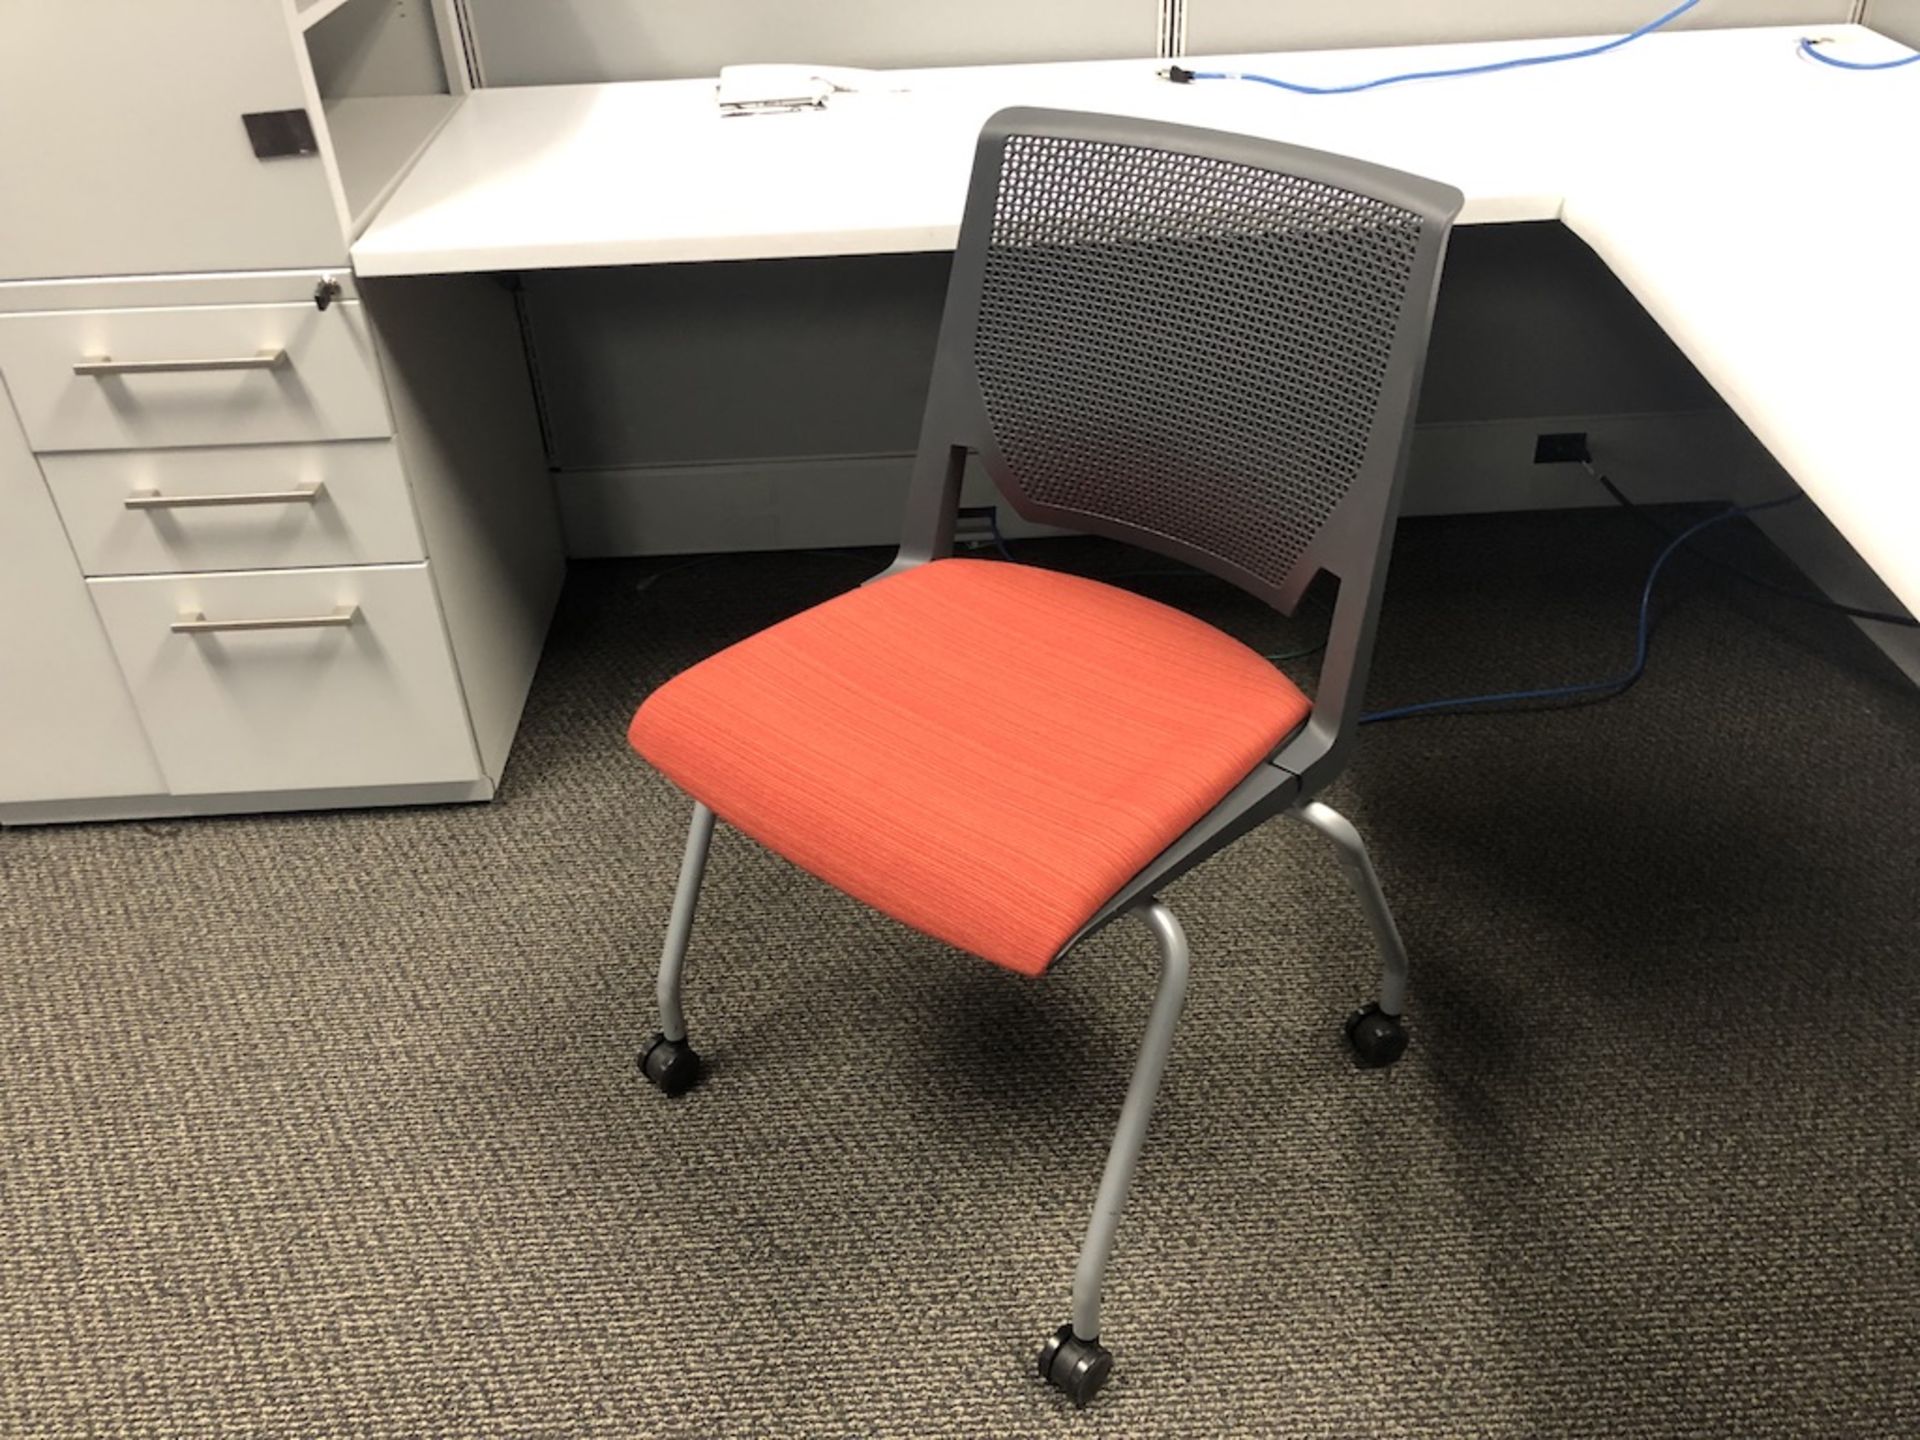 4 CASTER OFFICE CHAIR RED SEATING PAD   SCHNEIDER ELECTRIC- 6611 PRESTON AVE SUITE A - Image 3 of 3